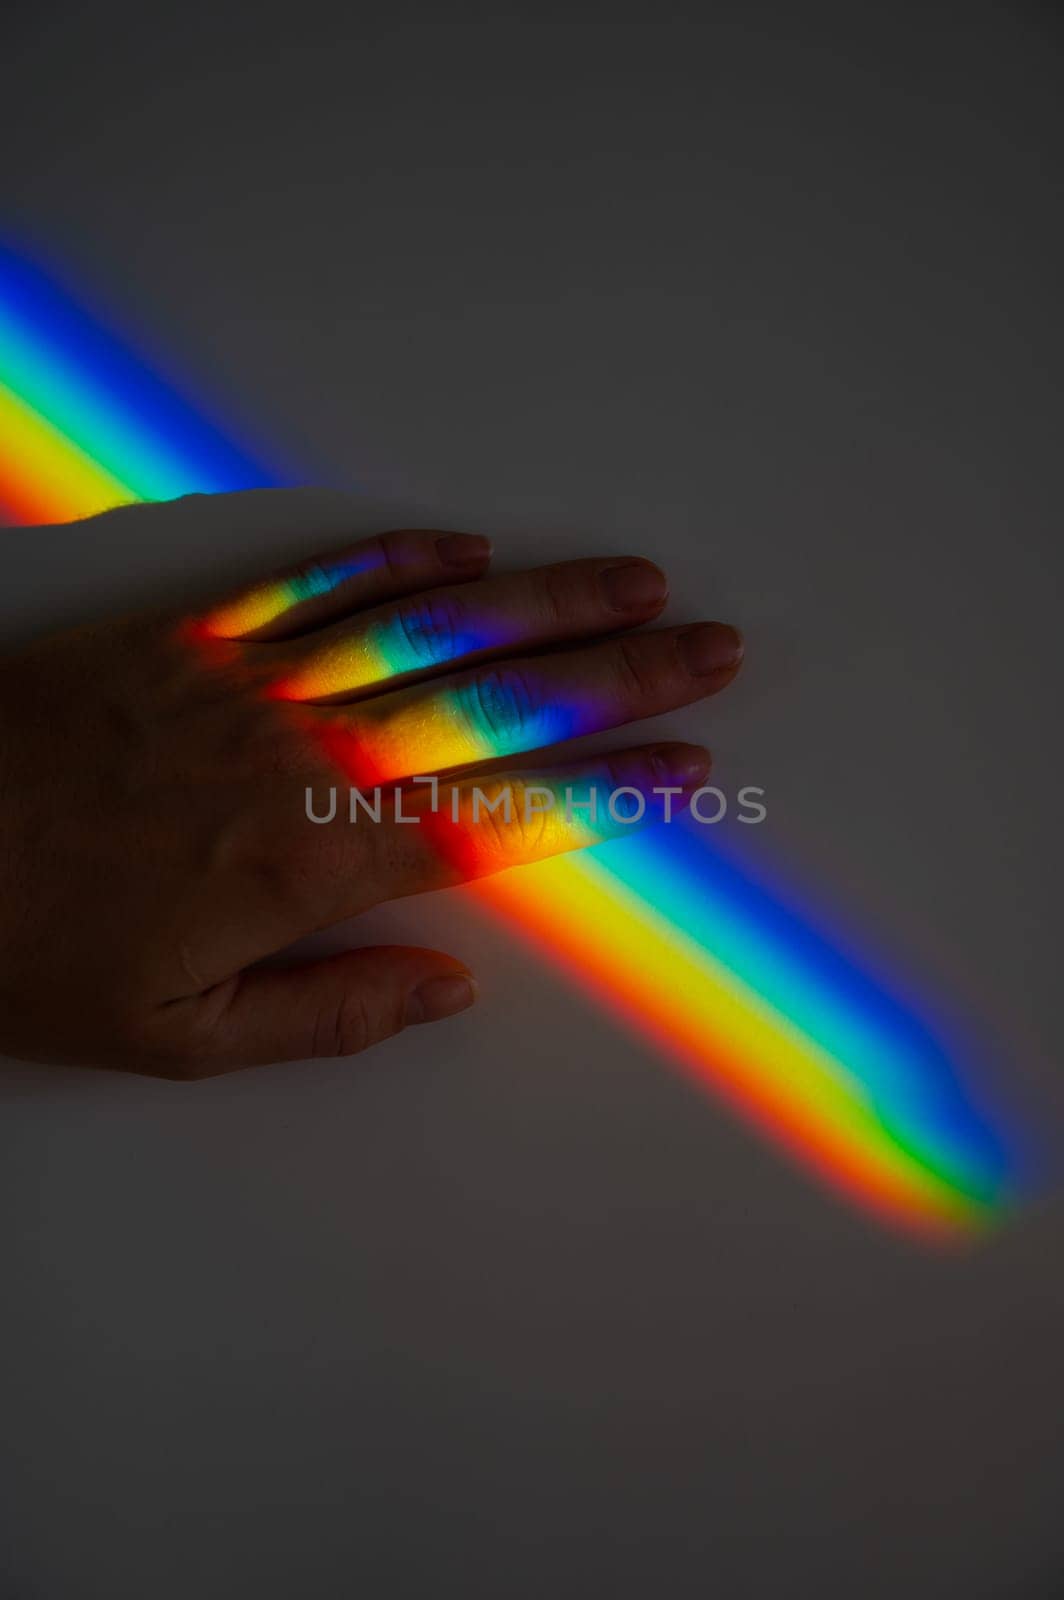 Rainbow ray on a woman's hand. by mrwed54